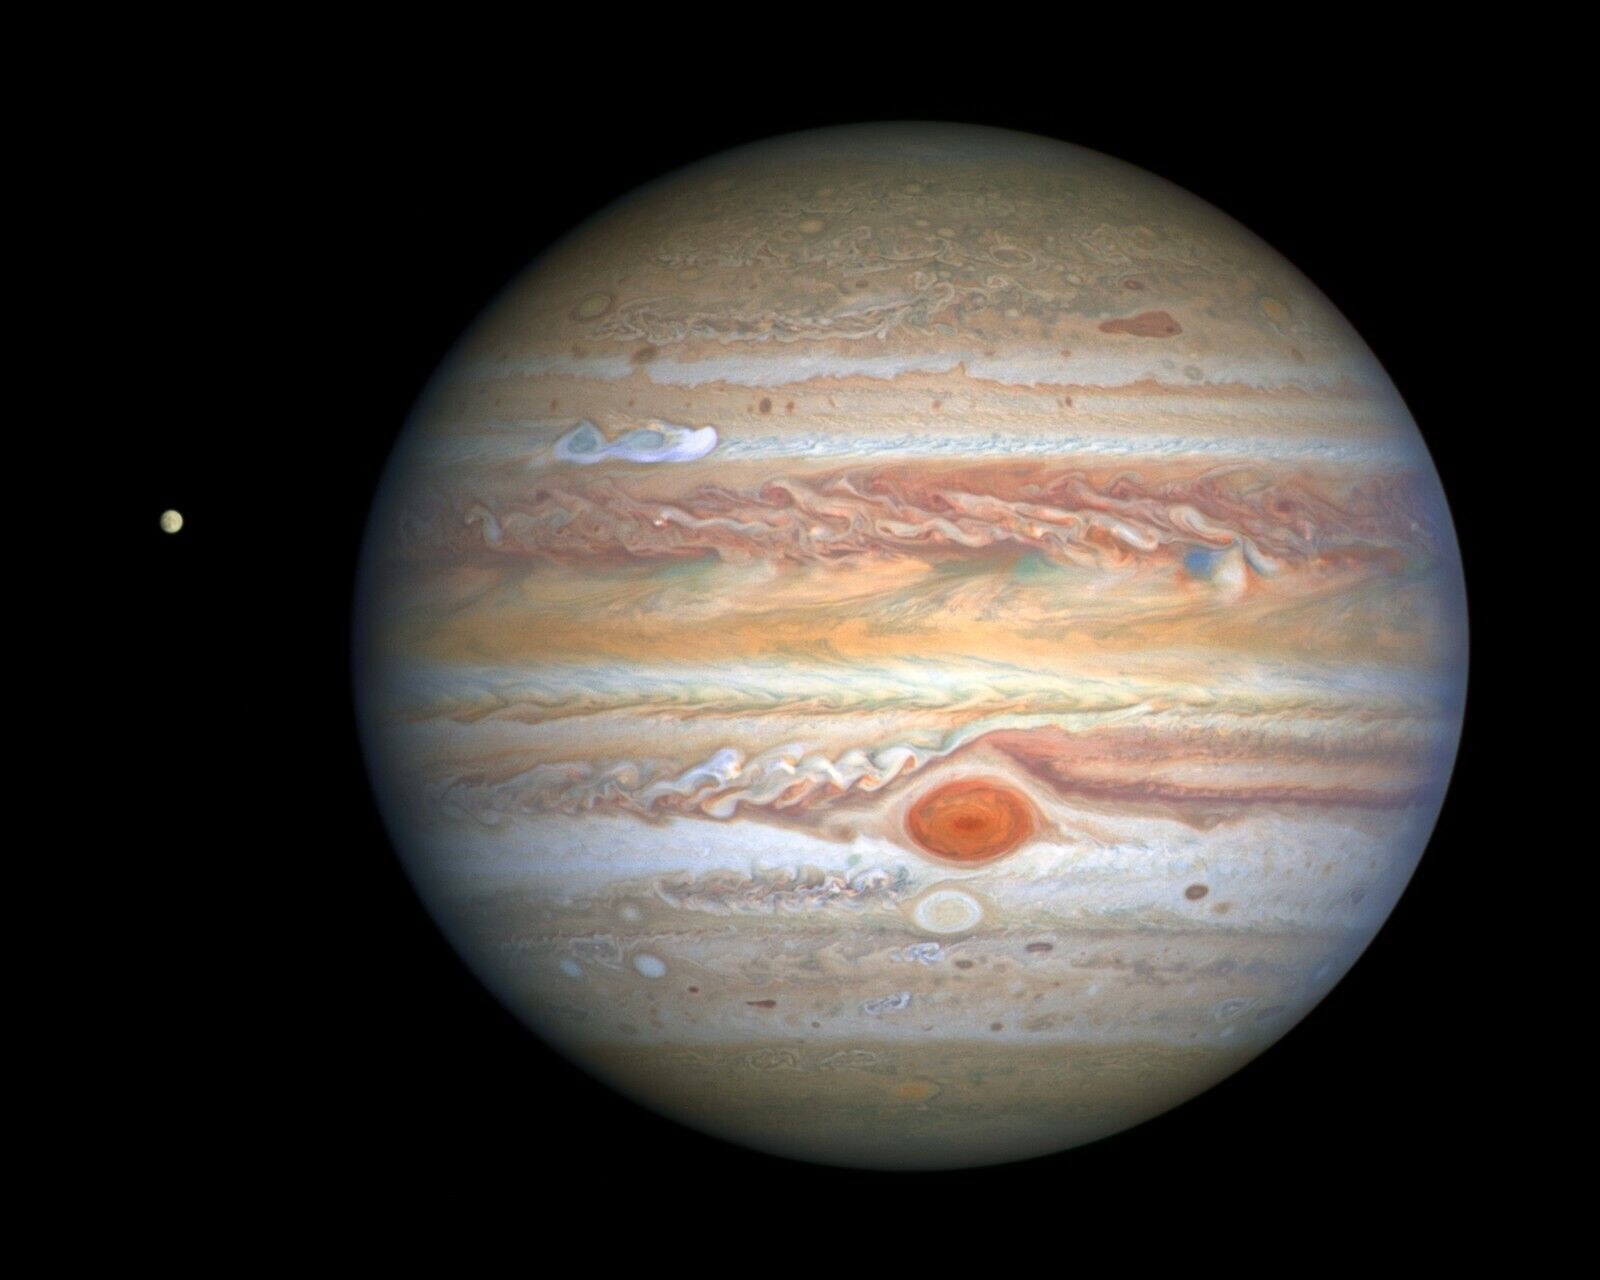 Planet Jupiter and Moon Europa 8x10 photograph